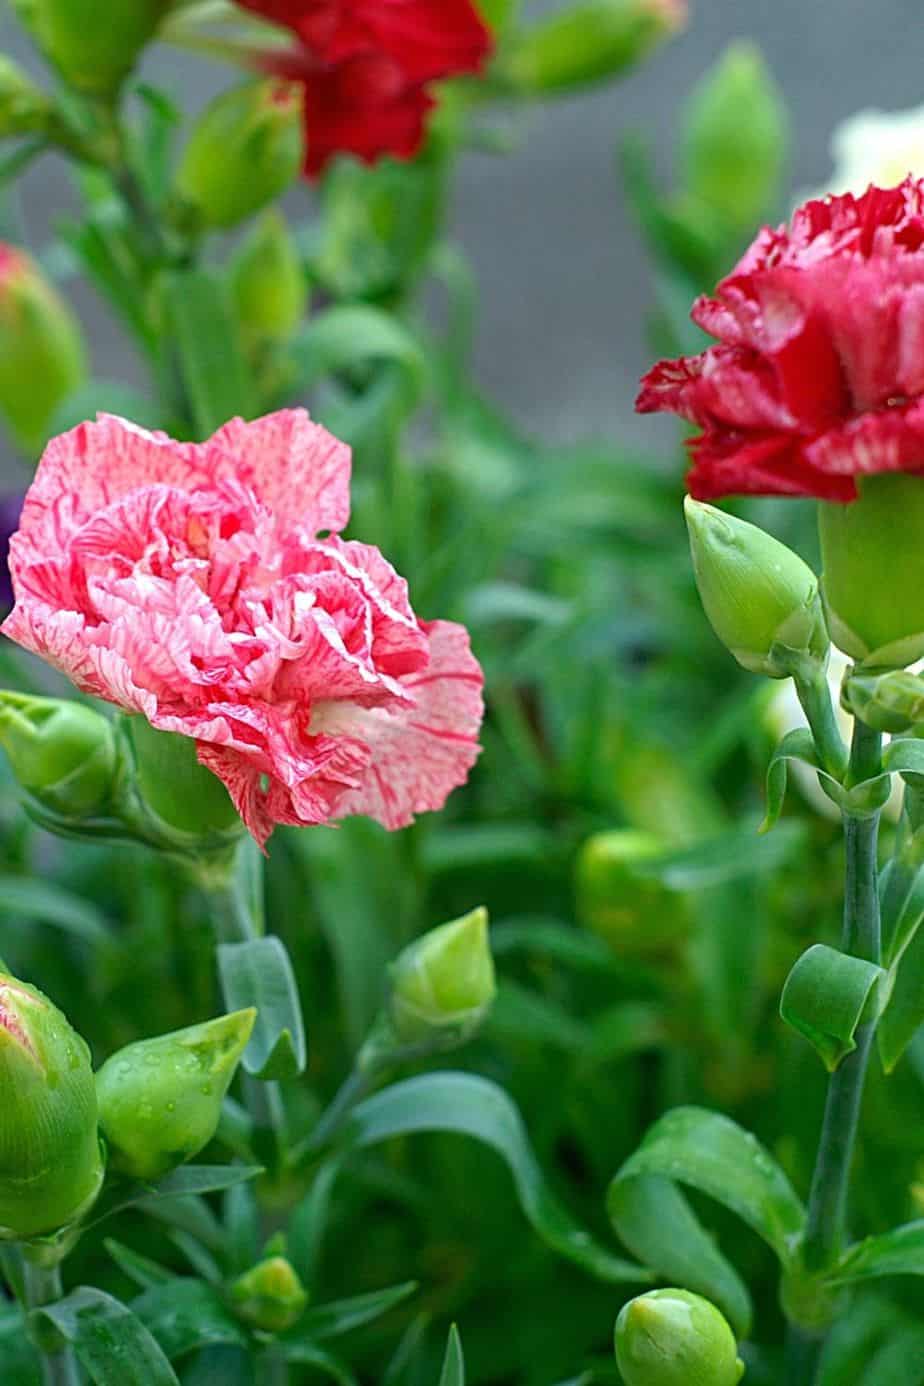 Carnation, aka Clove Pink, is another colorful plant you can add to your growing east-facing balcony collection